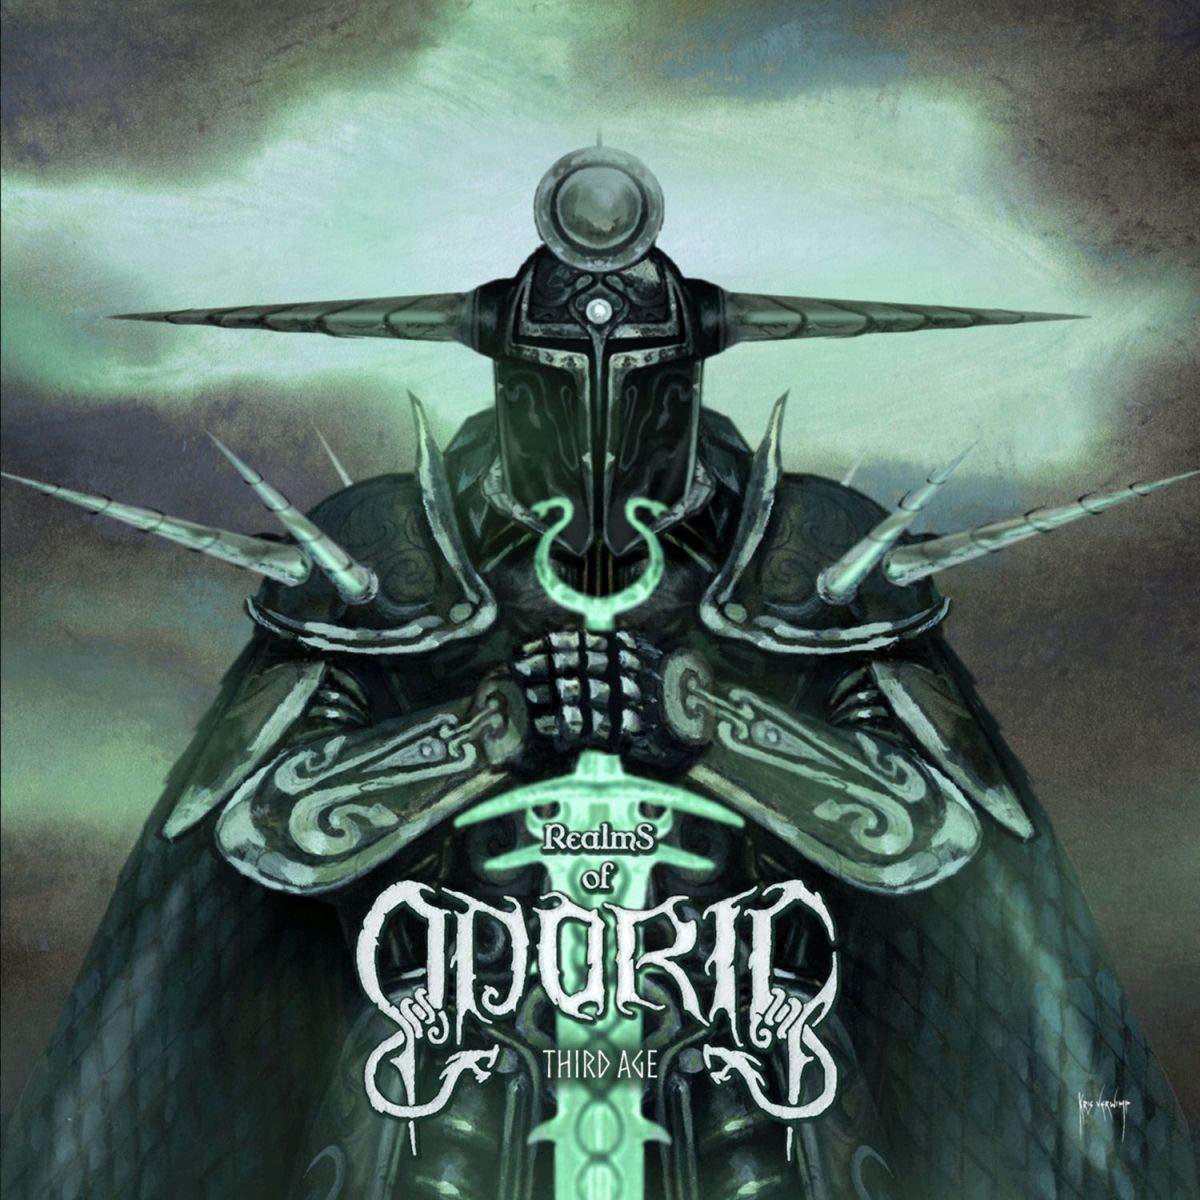 Realms Of Odoric (CD) - Age - Third